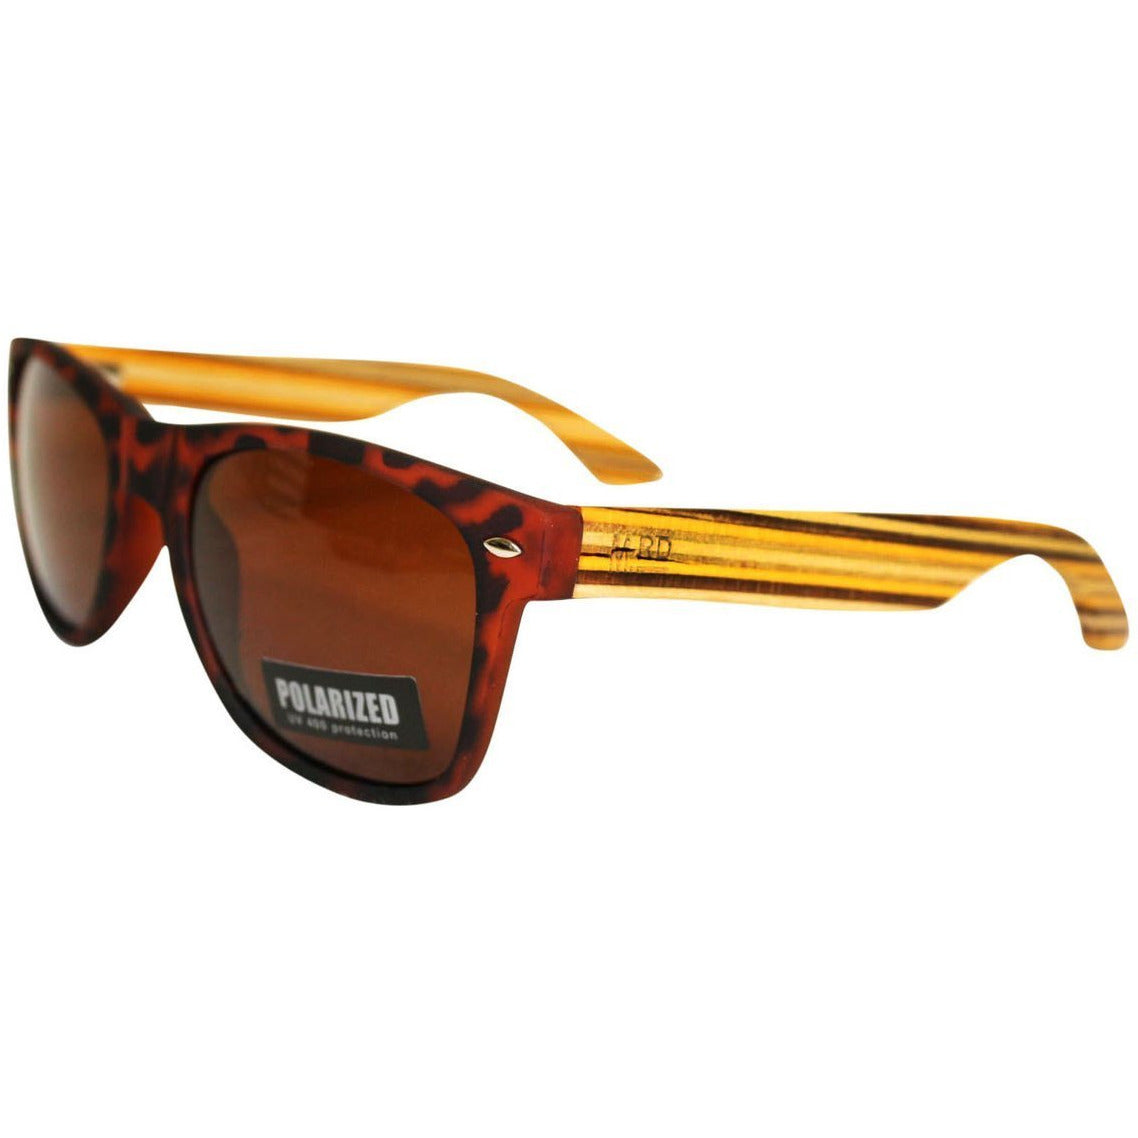 Wooden Sunnies - Tortoise Shell w/ Striped Arms | Moana Rd Moana Road